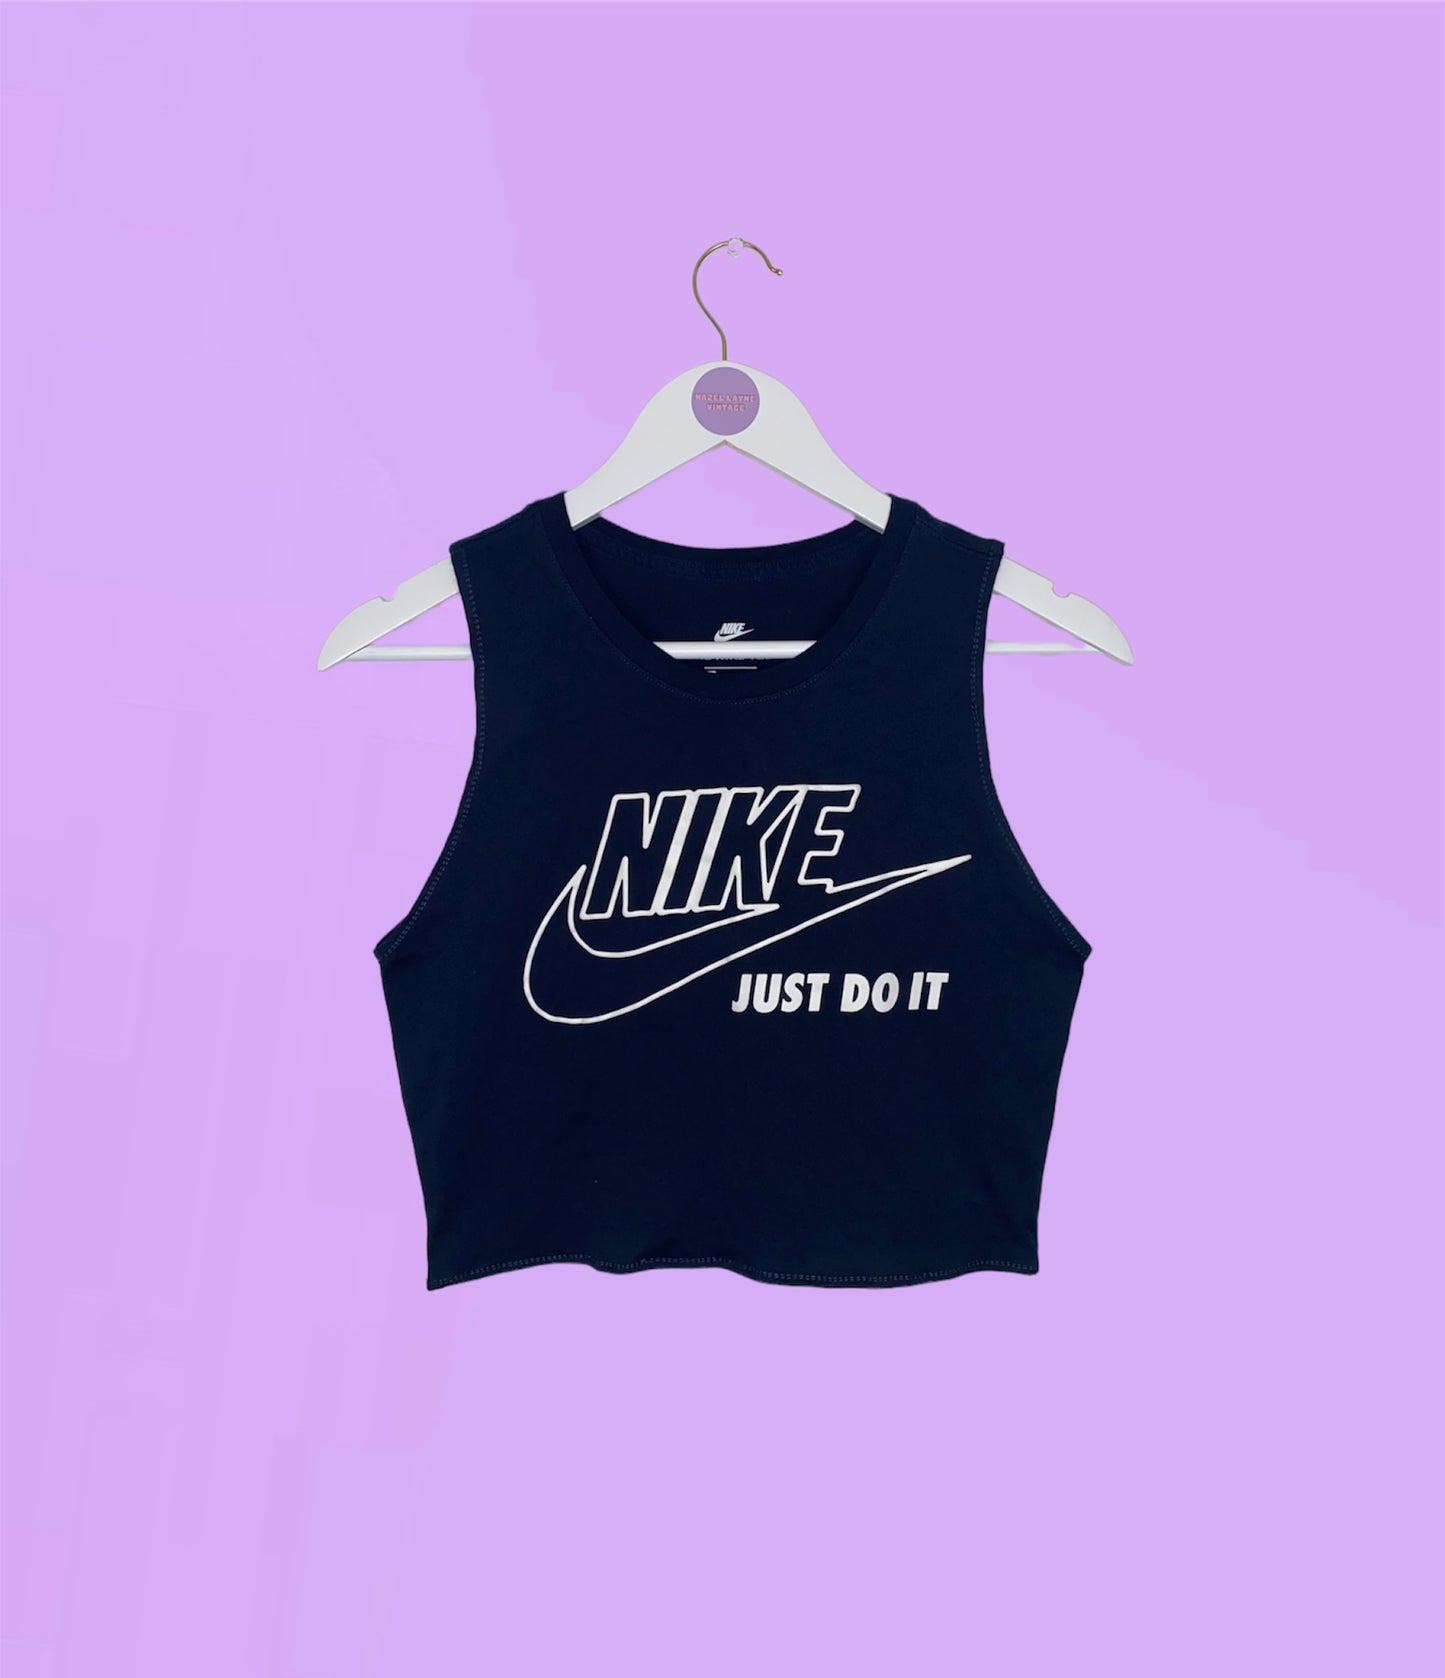 navy sleeveless crop top with white nike logo shown on a lilac background